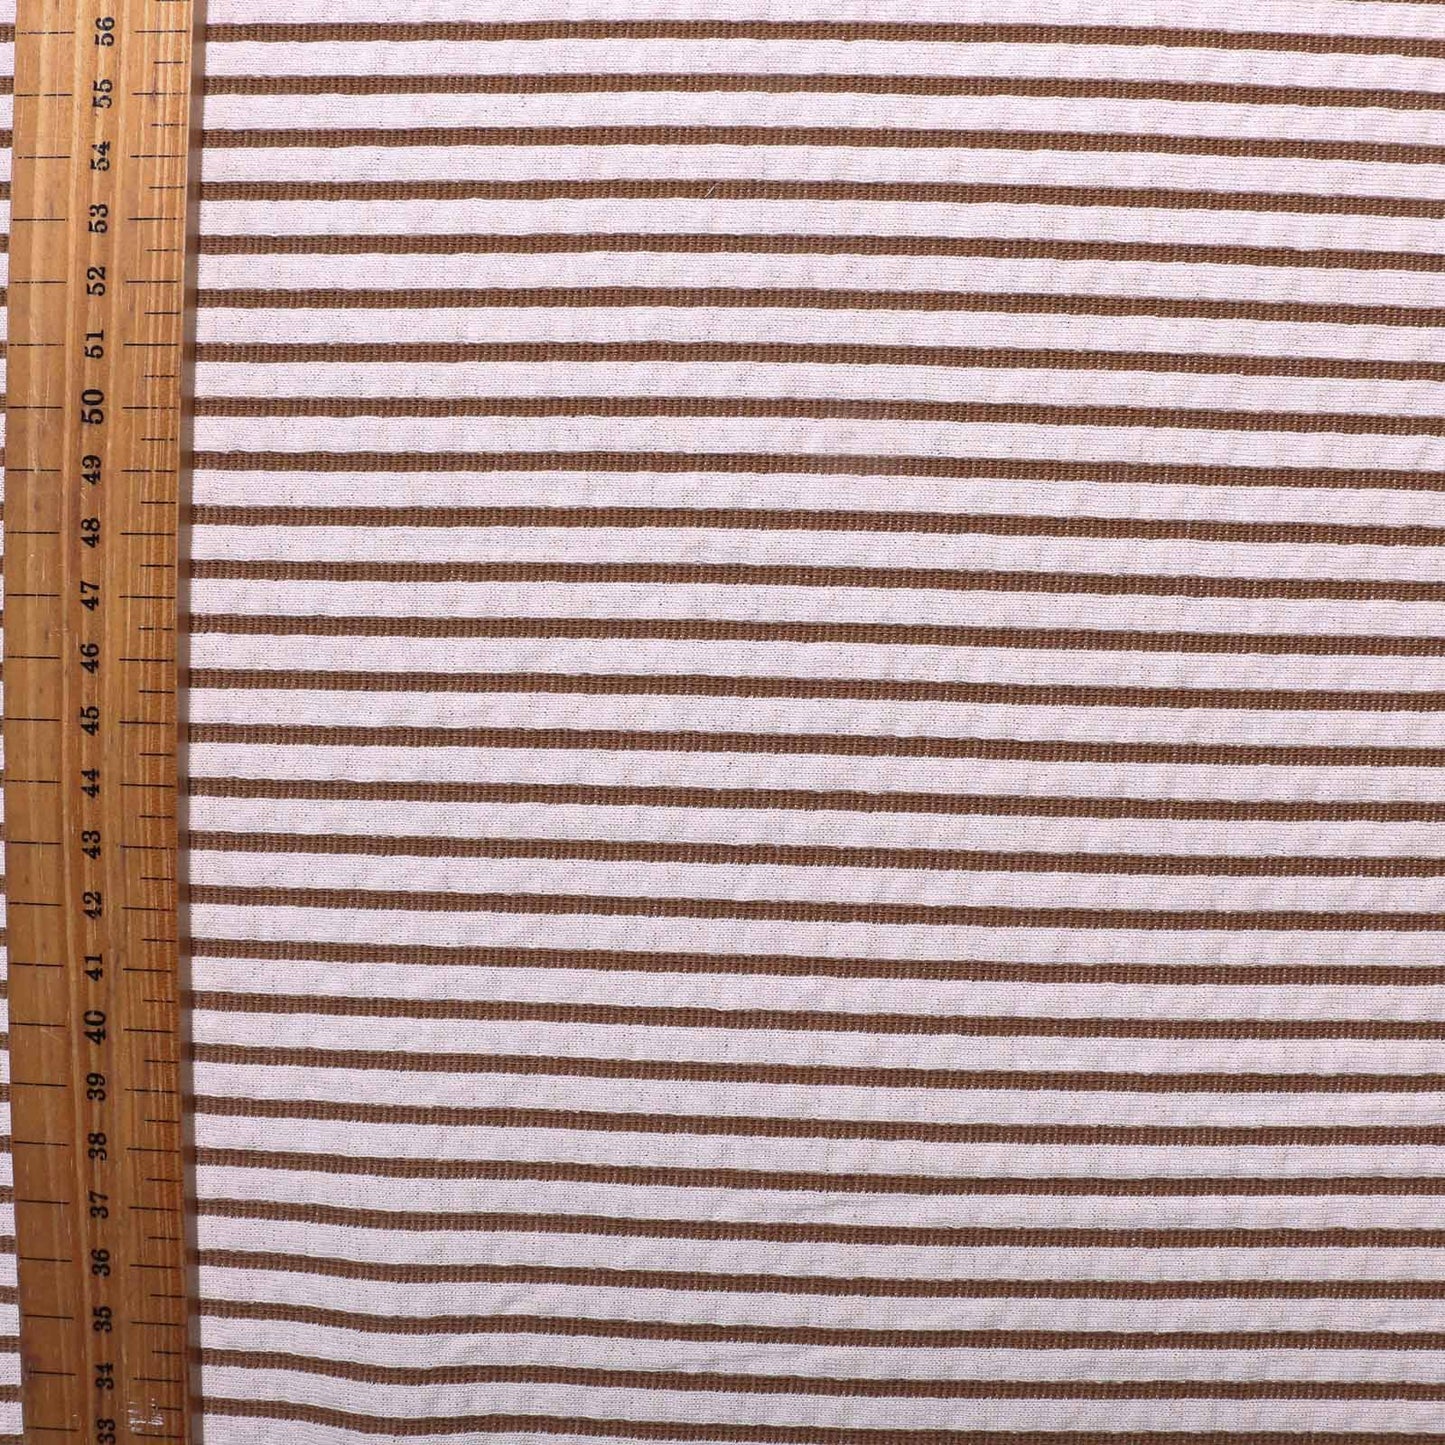 metre stretchy jersey knit acrylic dressmaking fabric in beige and white with striped pattern